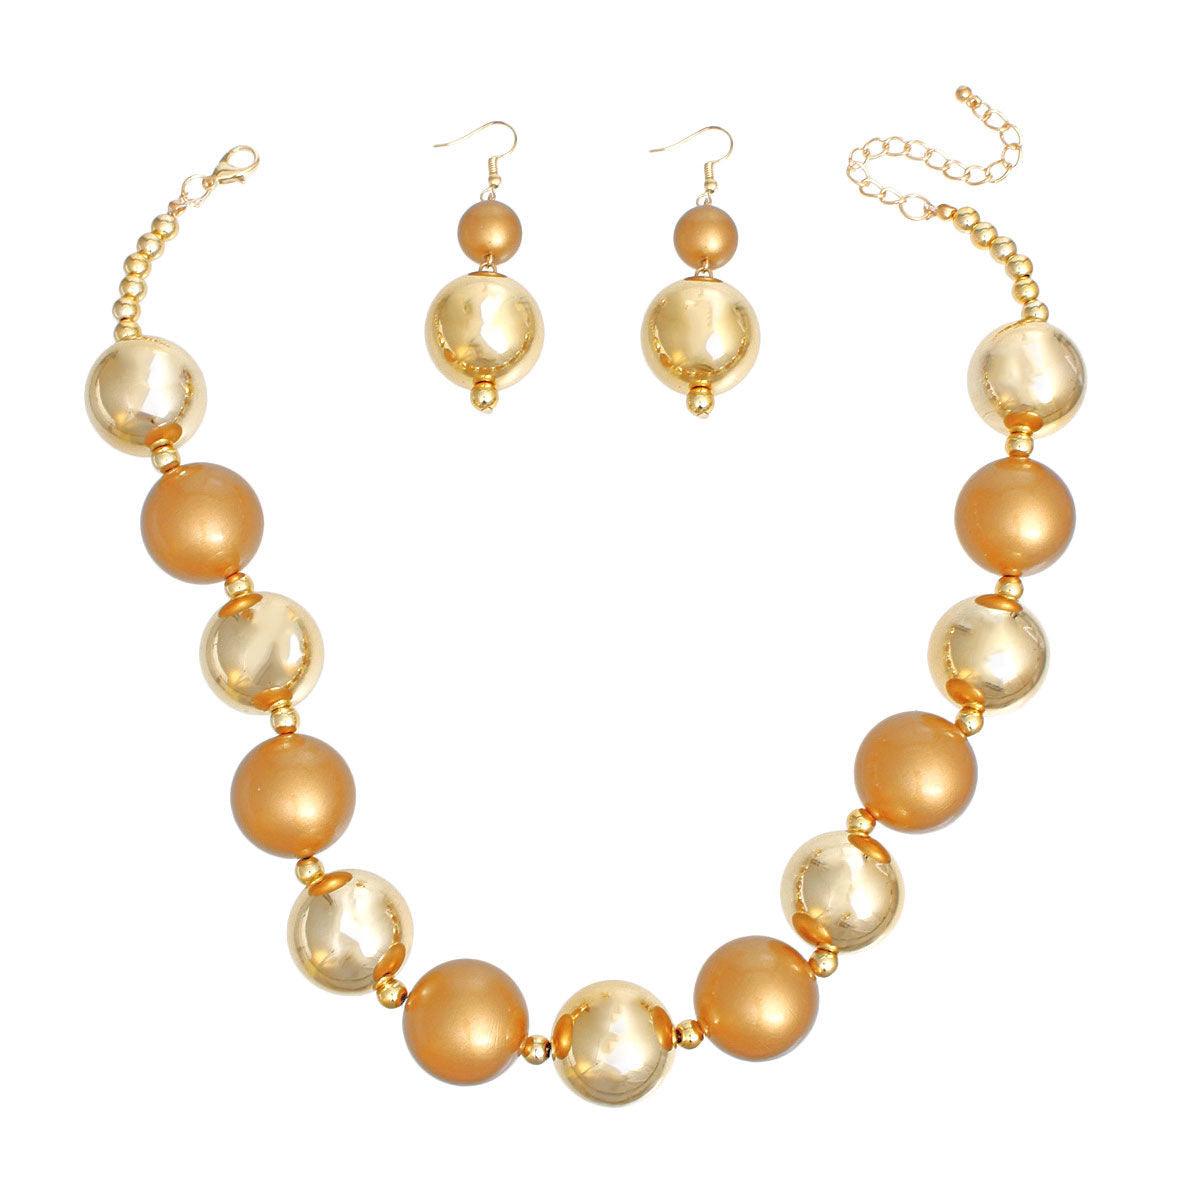 Bauble Pearl Bronze Gold Necklace Earrings Set - Level Up Your Fashion Jewelry Collection